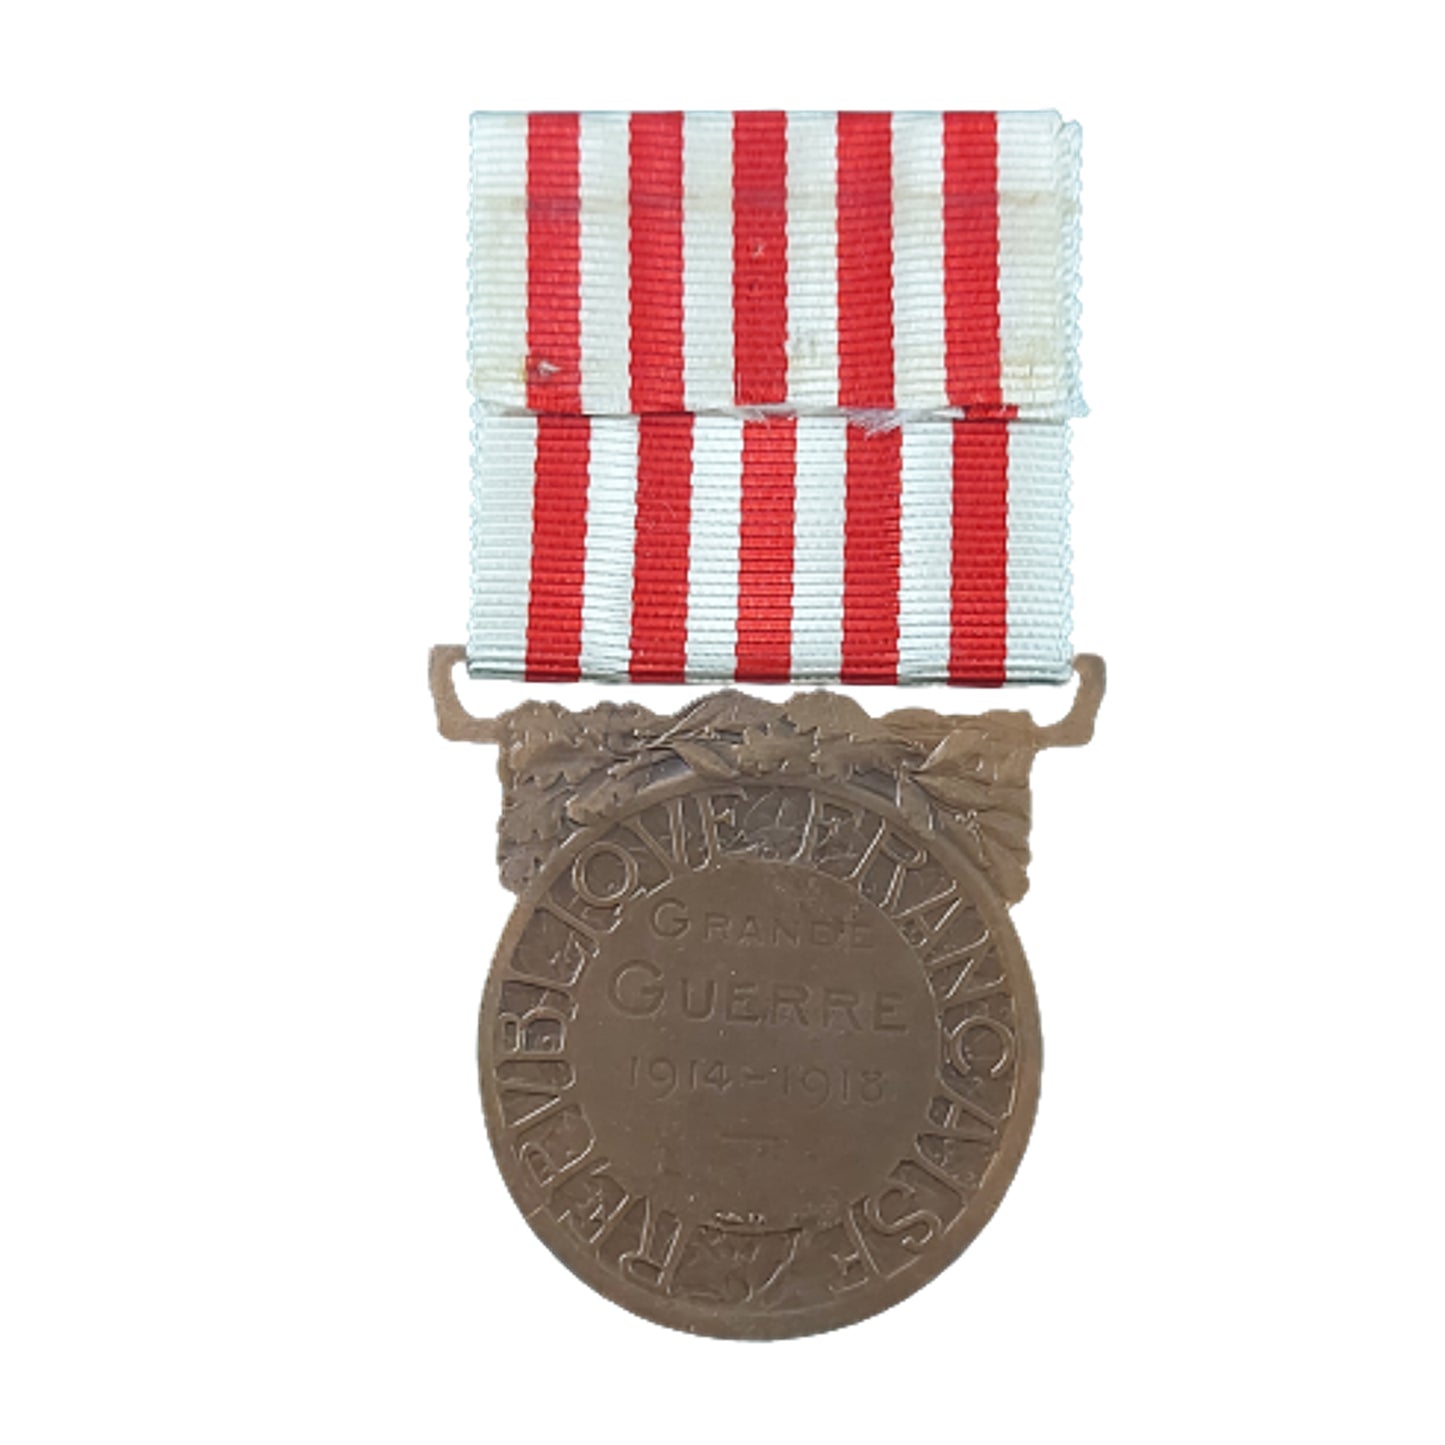 WW1 French 1914-1918 Commemorative Medal (Medaille Commemorative 1914-1918)